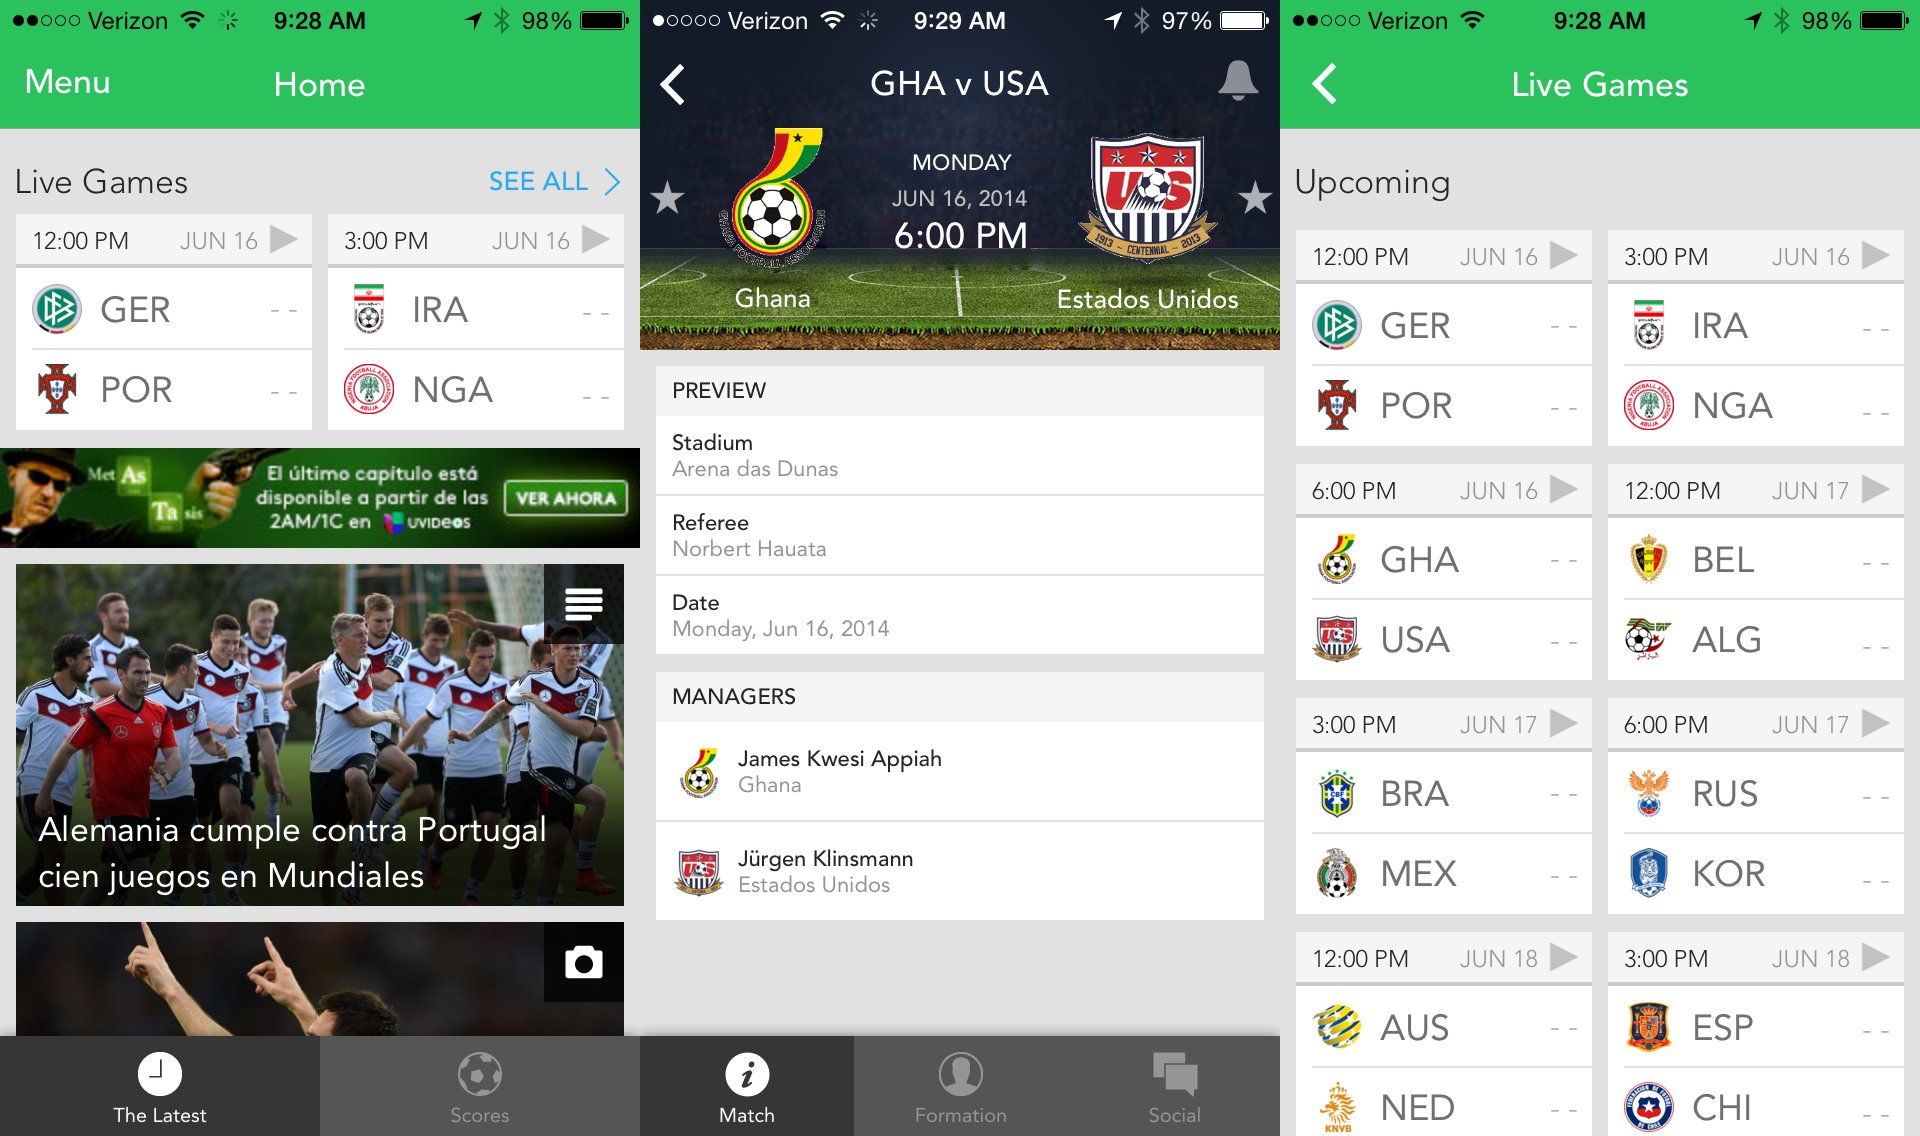 As fans prepare to watch the USA vs Ghana match live, World Cup apps take over the top charts and games trend on Twitter and Facebook.